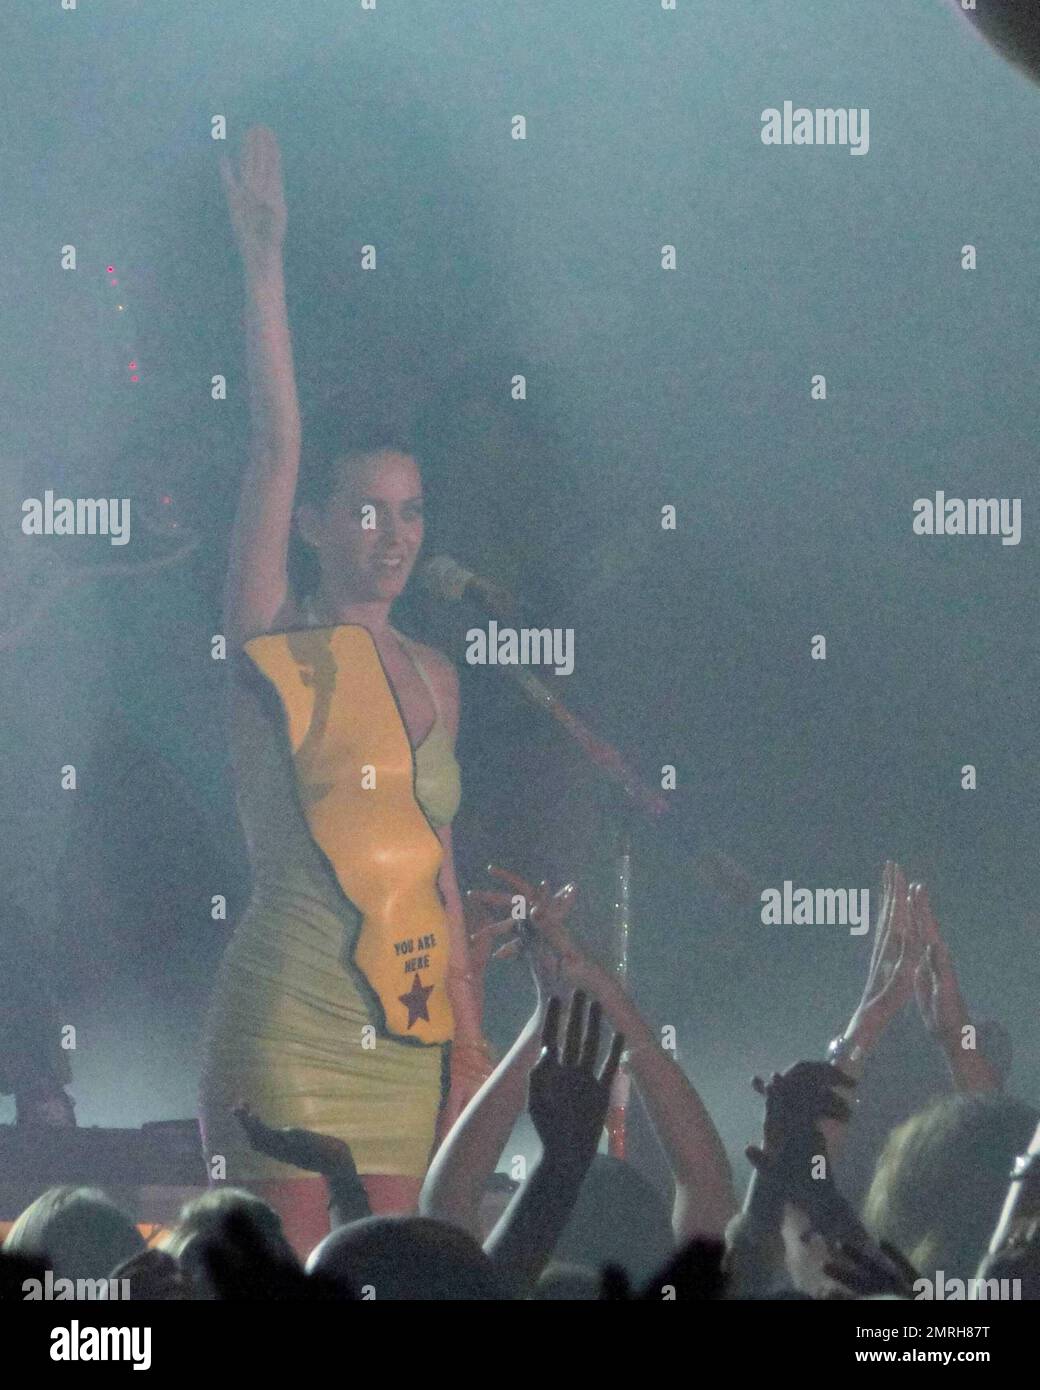 International singer-songwriter Katy Perry performs live at Atlantis Paradise Island in the Grand Ballroom.  Perry performed to Atlantis guests wearing a lime green rubber dress adorned with a yellow map  of what appeared to be California State and a 'you are here' red star.   In true Perry style the stage was decked out with Neon Palm Trees and bouncing beach balls for the crowd.  Perry releases her new album 'Teenage Dream' in August which features her top ten single 'California Gurls' which is the fastest rising single to Top 10 radio in over four years.  Bahamas  7/17/2010   . Stock Photo